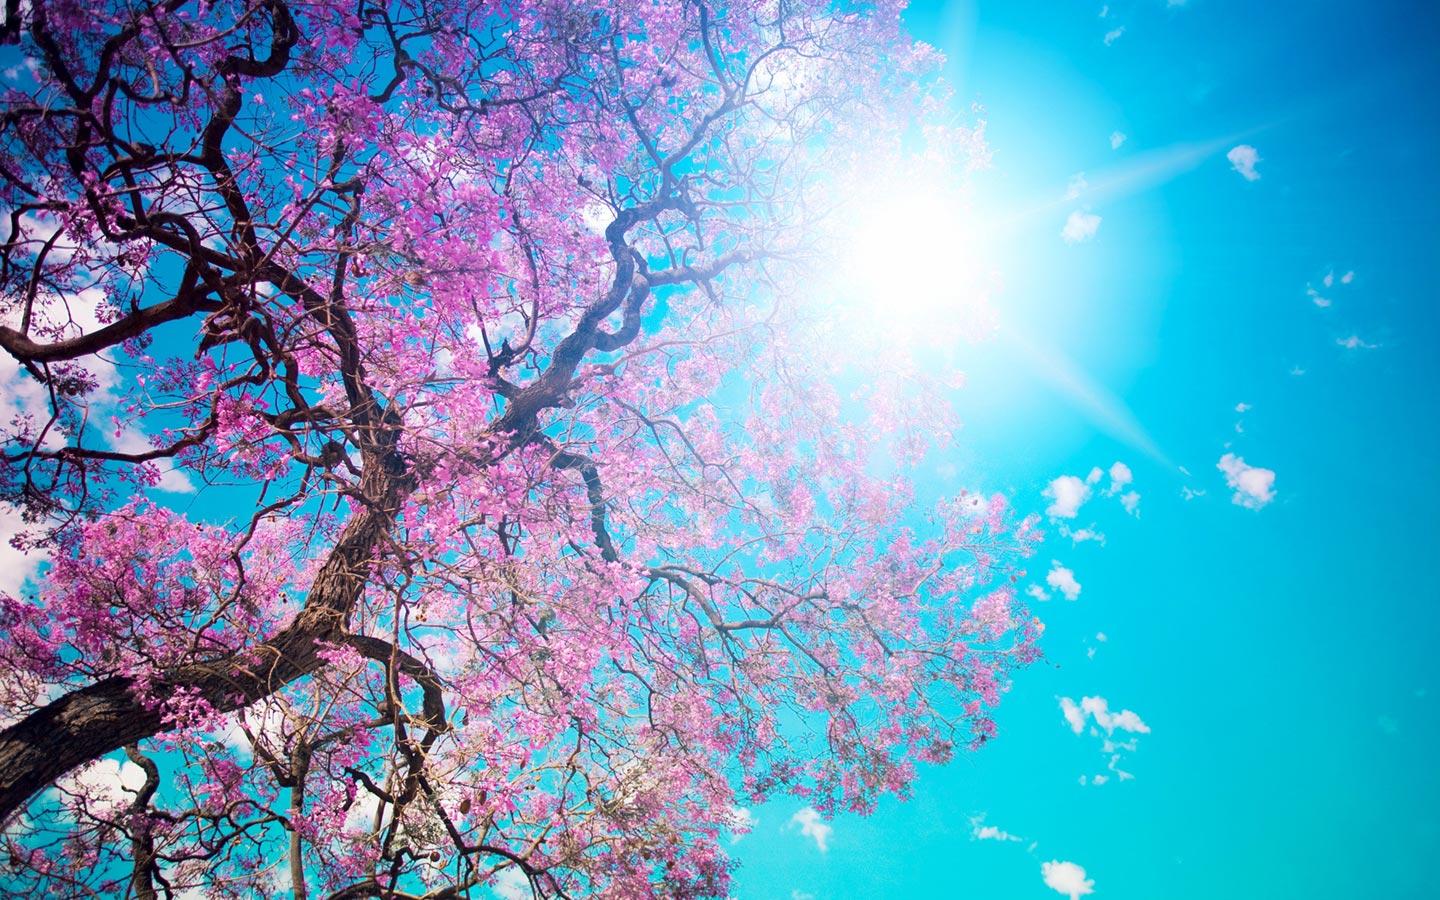 Spring Backgrounds 5 Amazing Background 21857 Hd Wallpaper